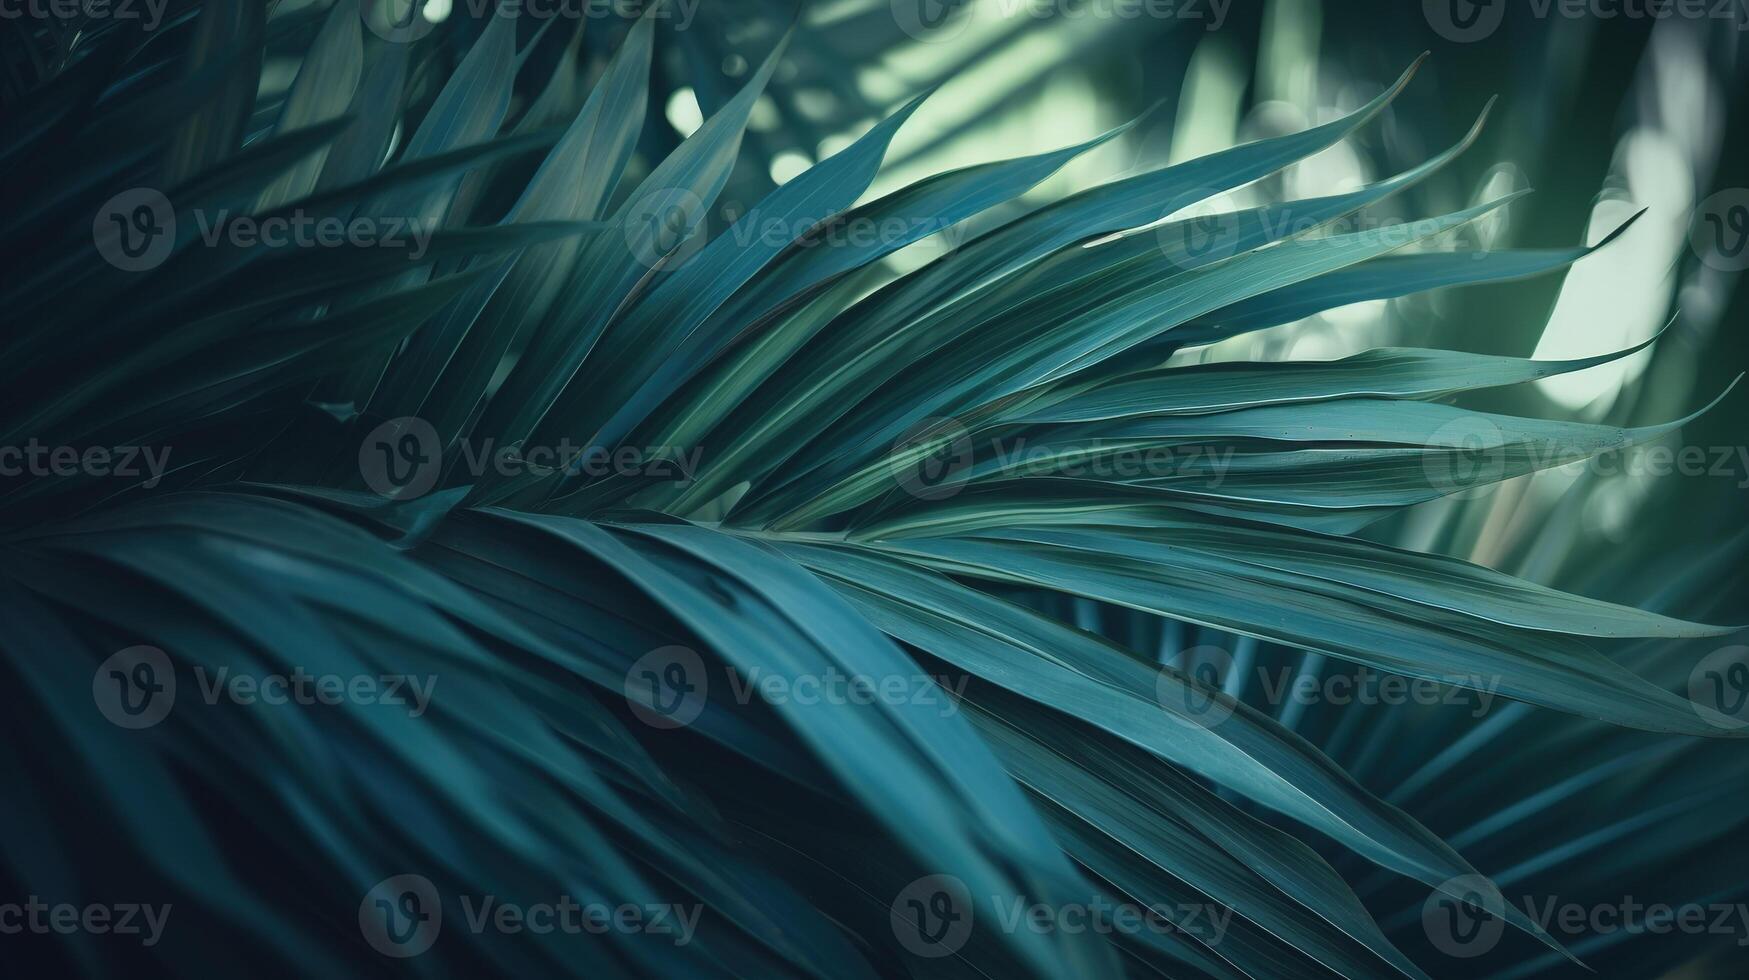 Palms in Detail, A Close-up of Lush Green Foliage. photo